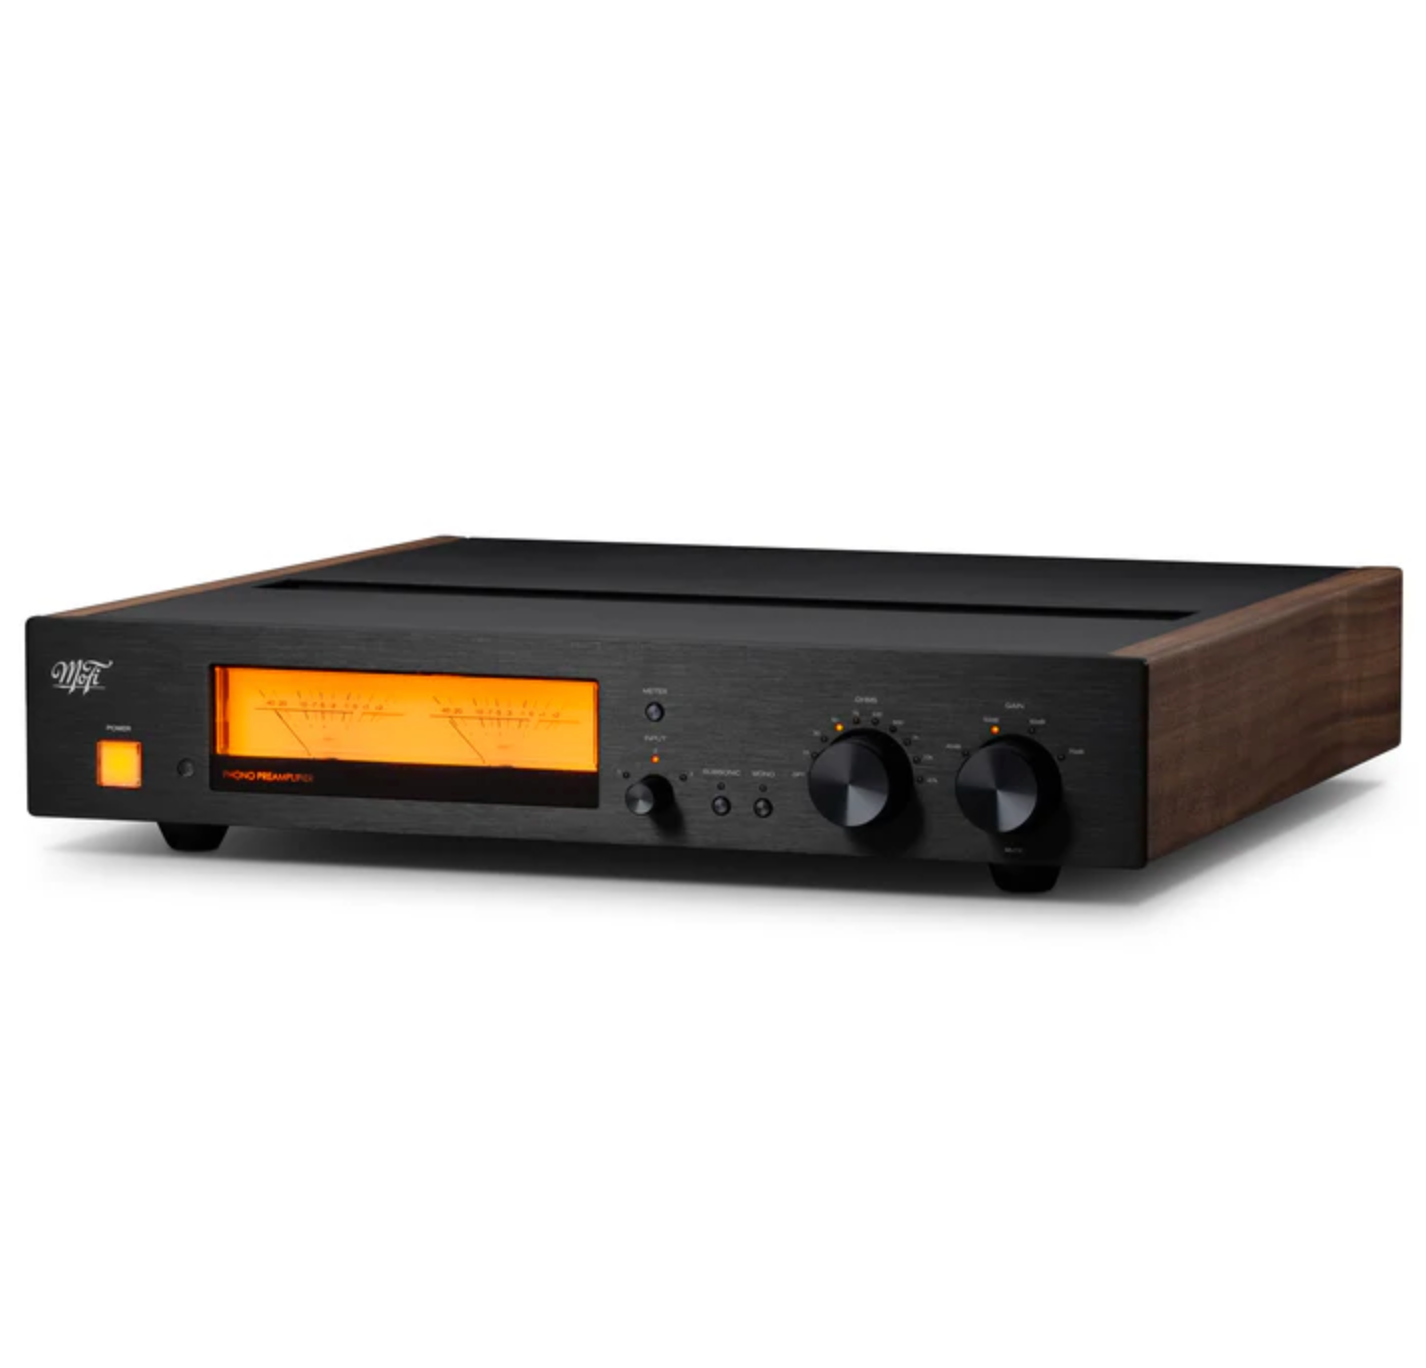 Mobile Fidelity (MoFi Electronics) MasterPhono Phono Stage in Walnut Front and top angled image